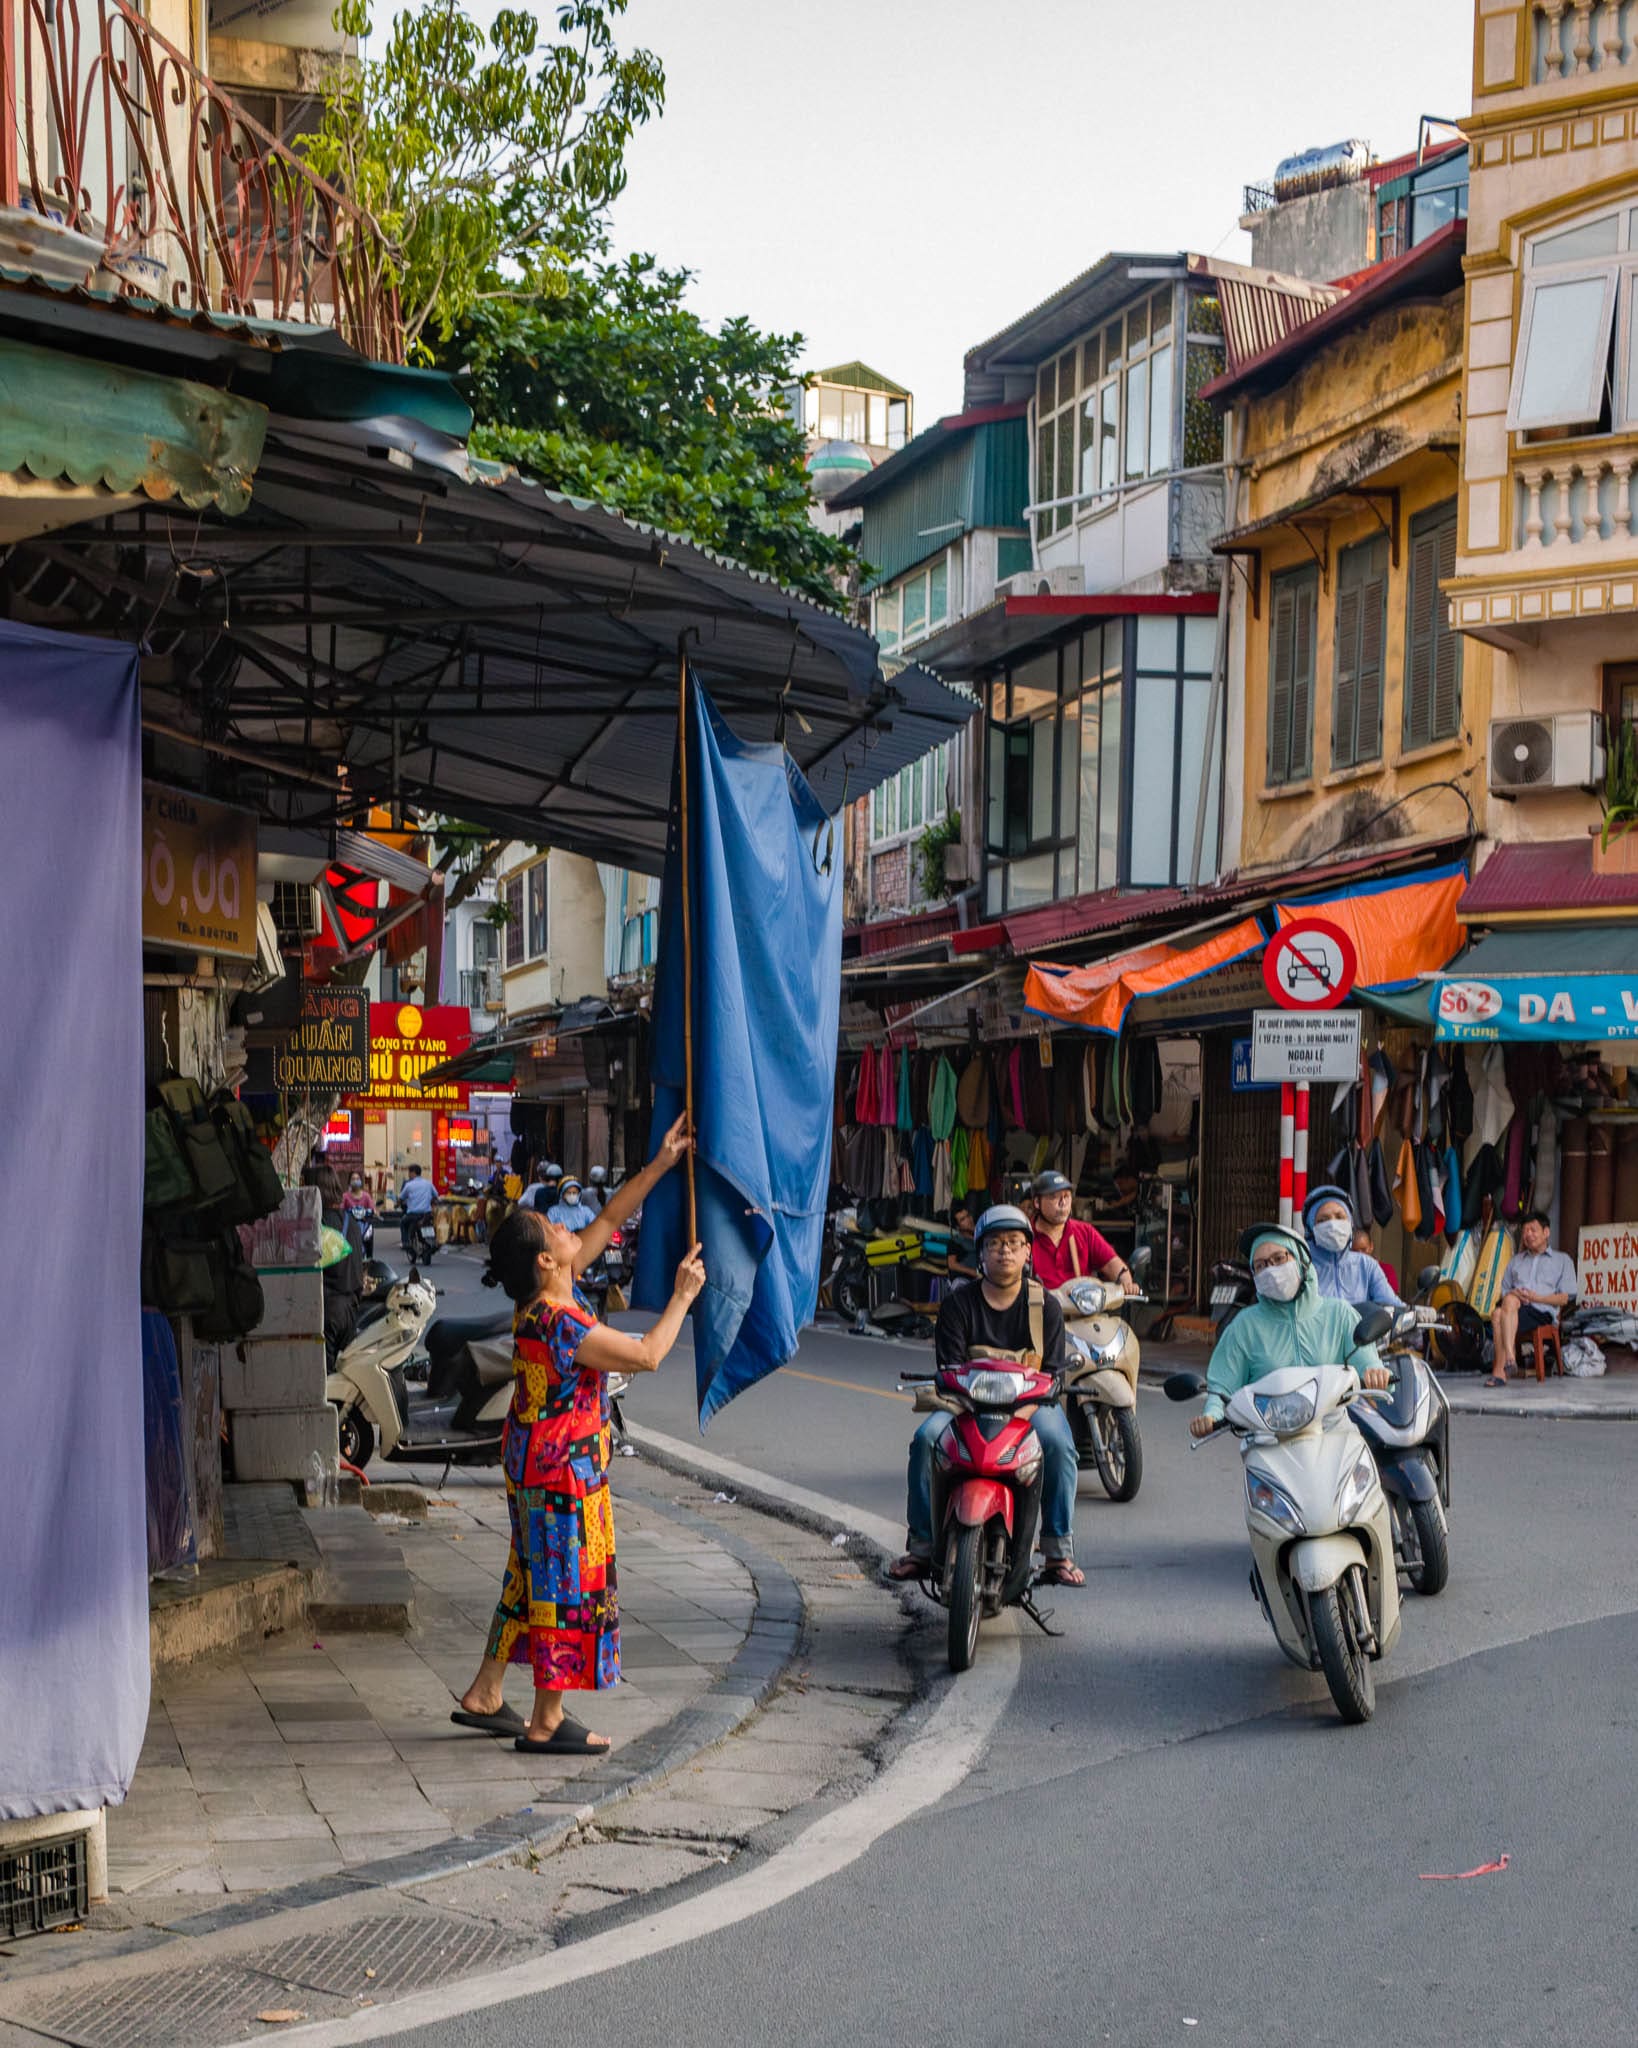 Bustling Hanoi city street with traditional buildings, motorbikes, and vibrant local life.